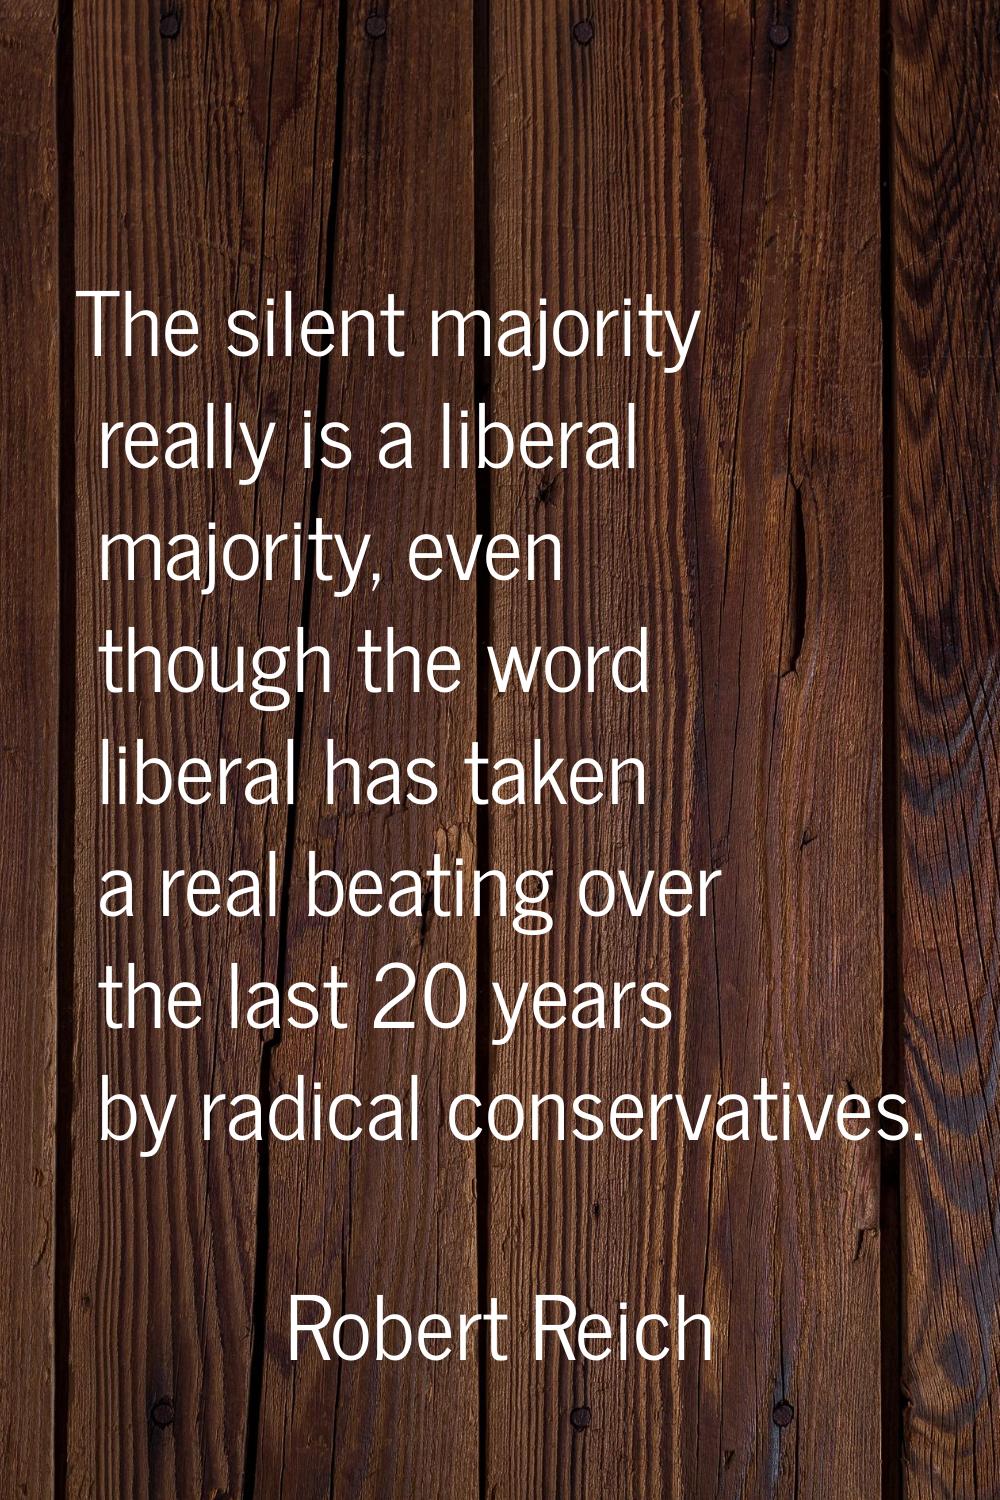 The silent majority really is a liberal majority, even though the word liberal has taken a real bea